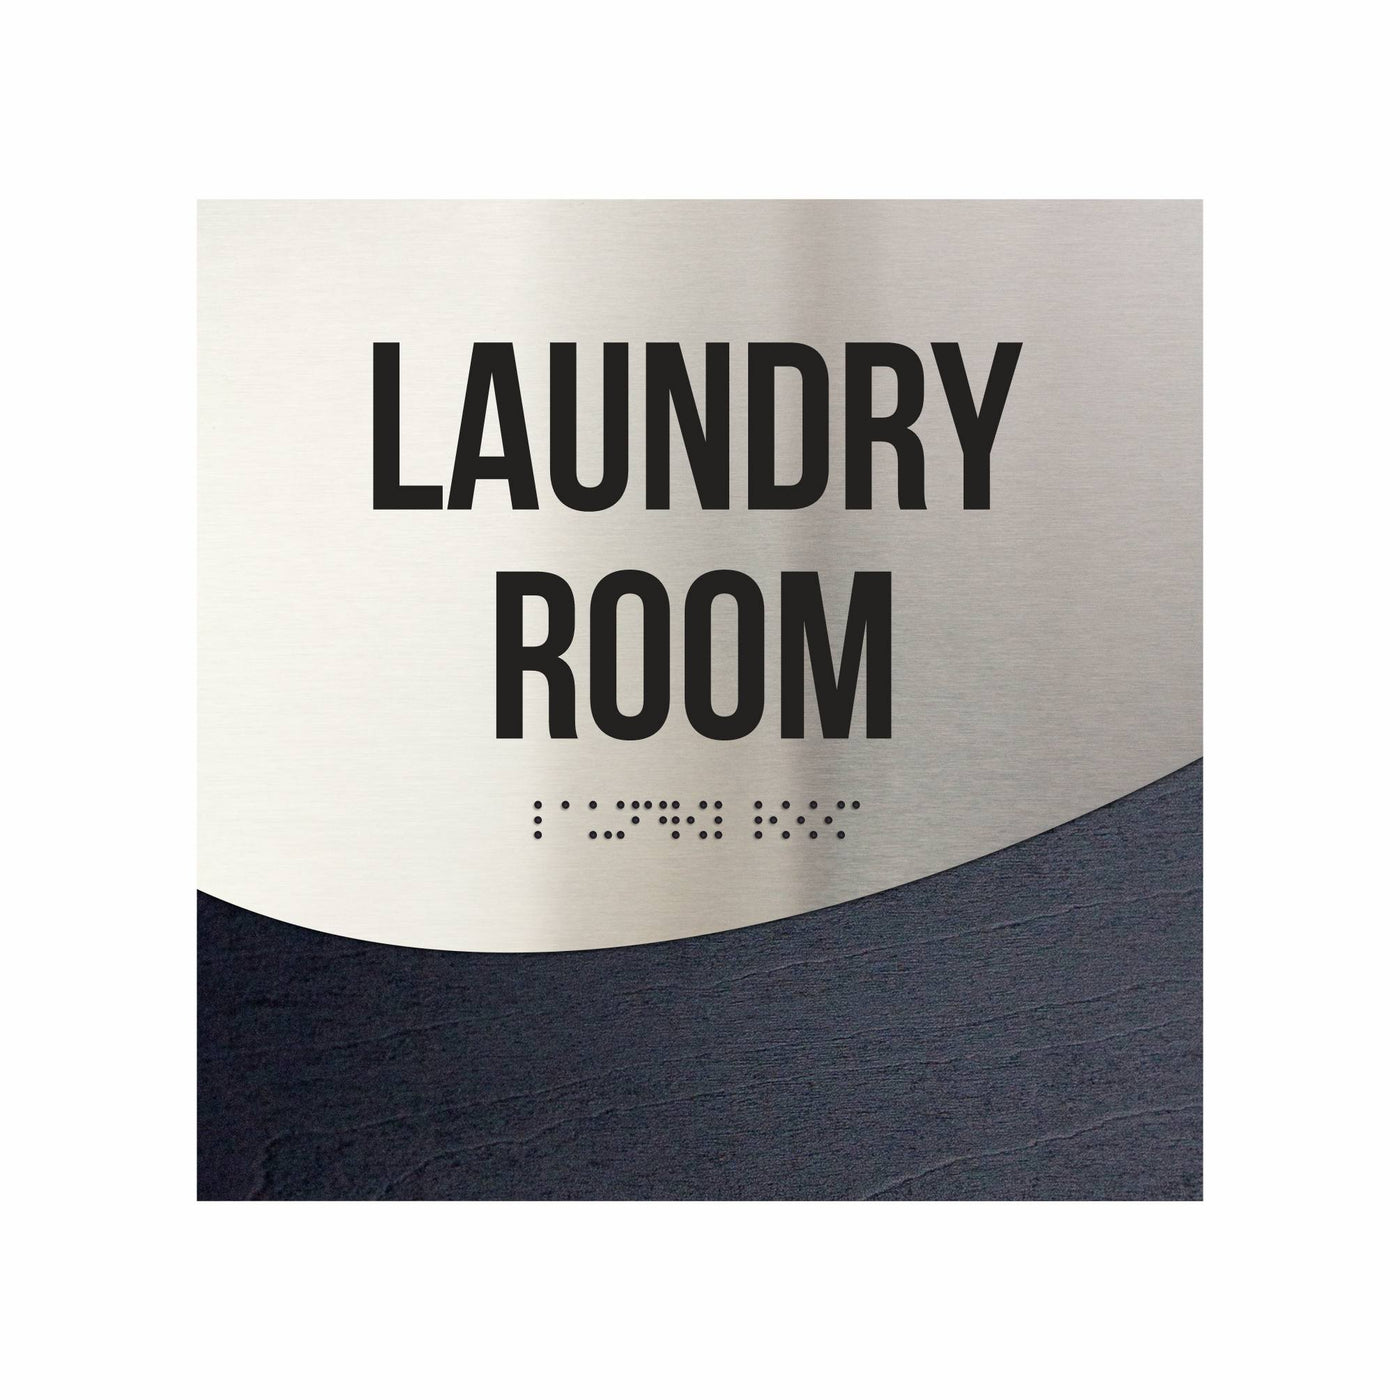 Laundry Room Sign - Interior Office Door Signs - Stainless Steel & Wood "Jure" Design